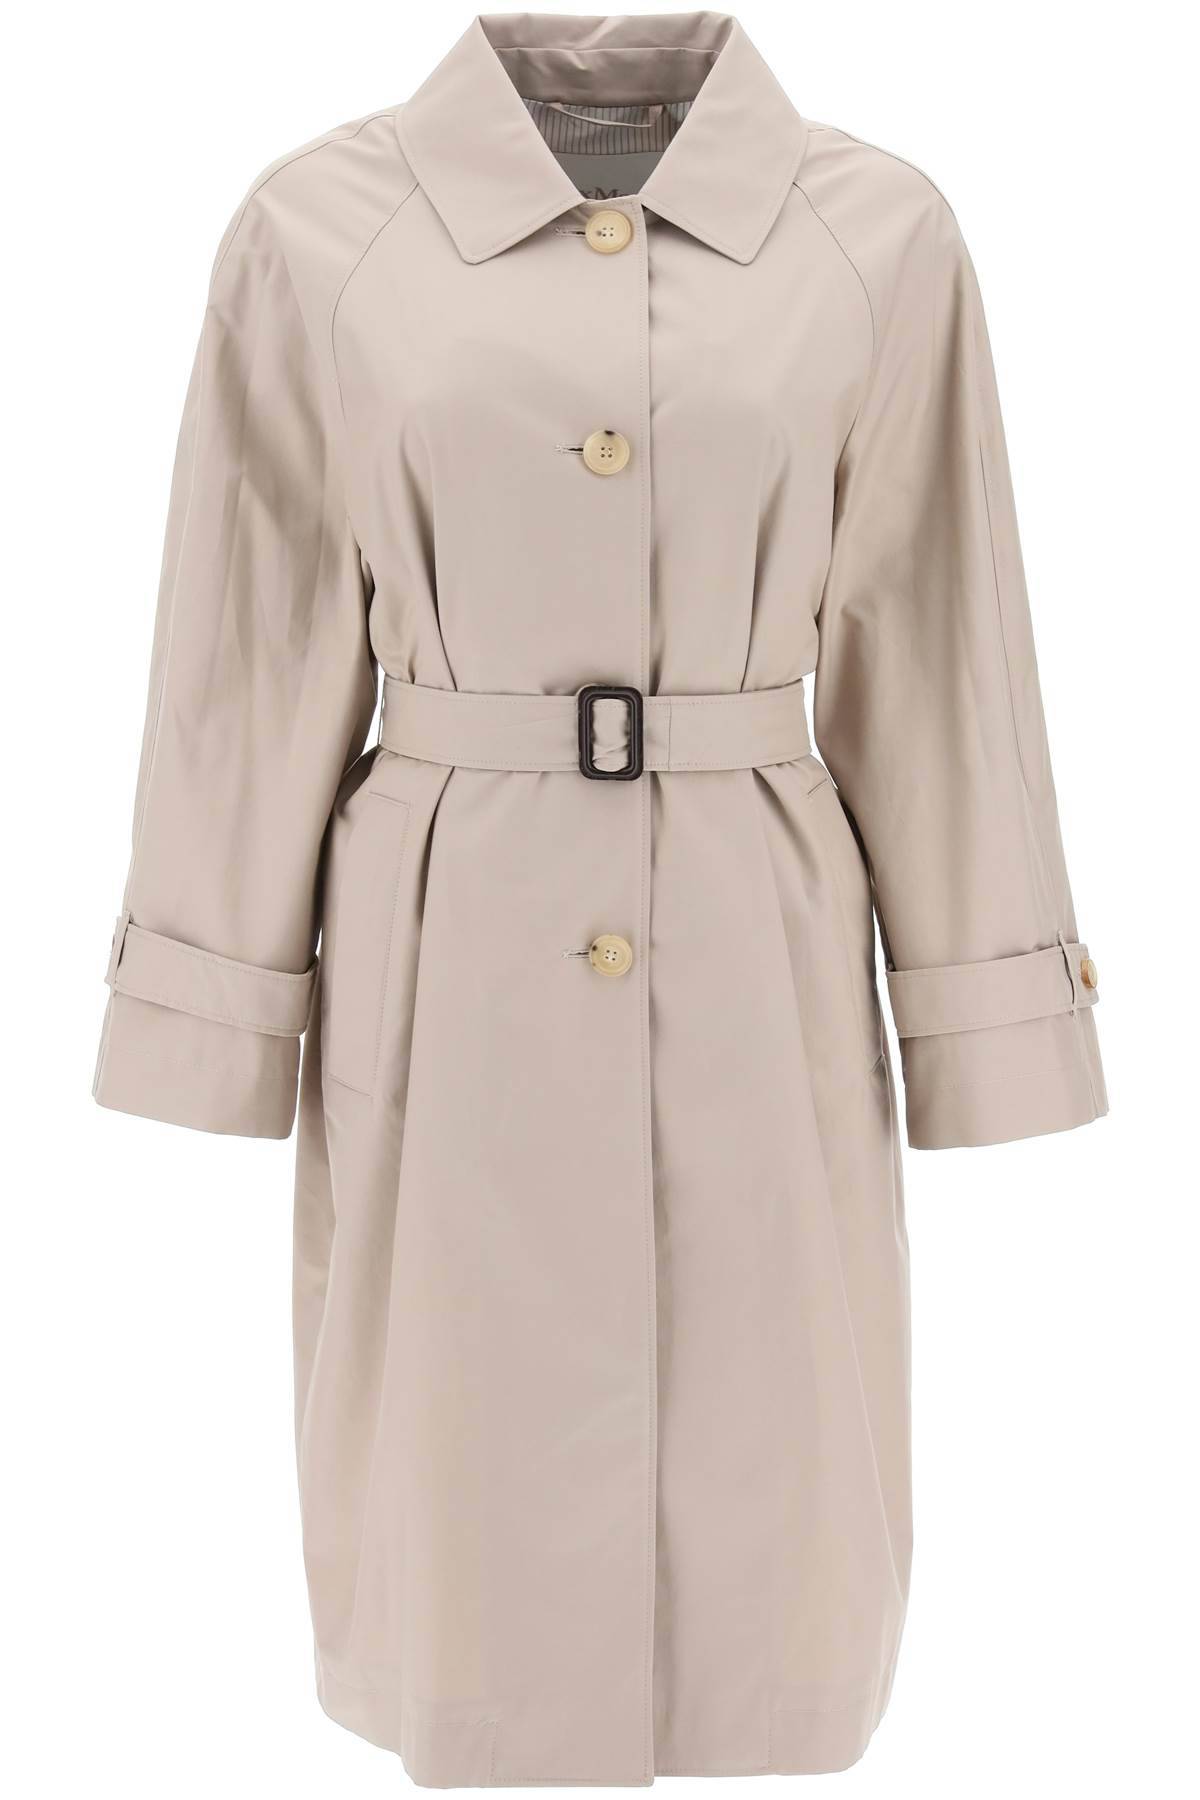 MAX MARA THE CUBE MAX MARA THE CUBE single-breasted trench coat in water-resistant twill